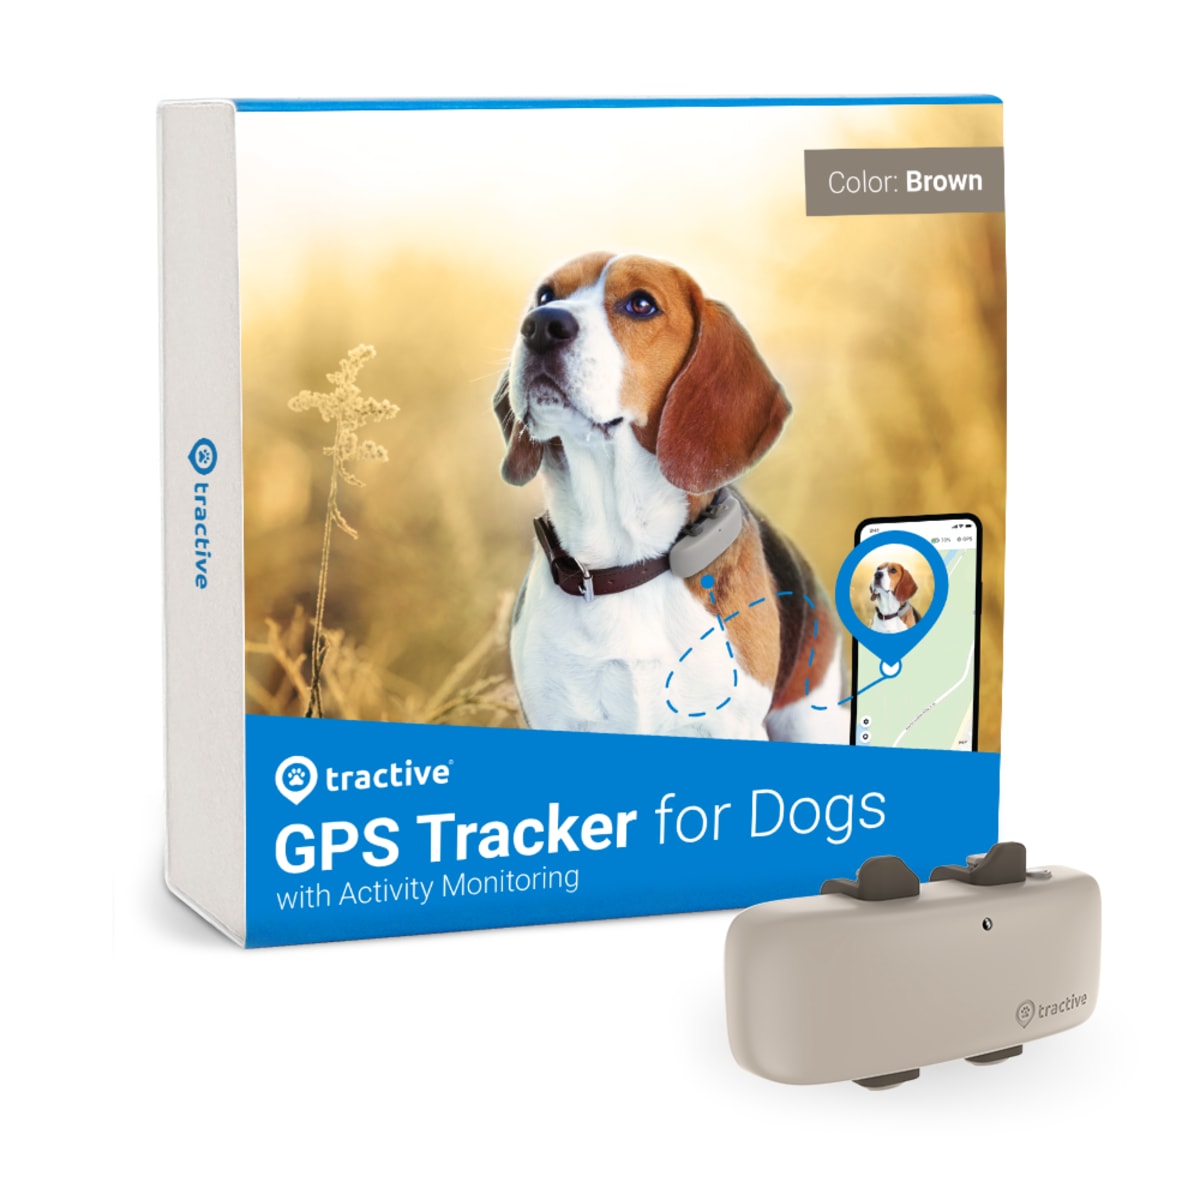 Packaging of Tractive GPS DOG 4